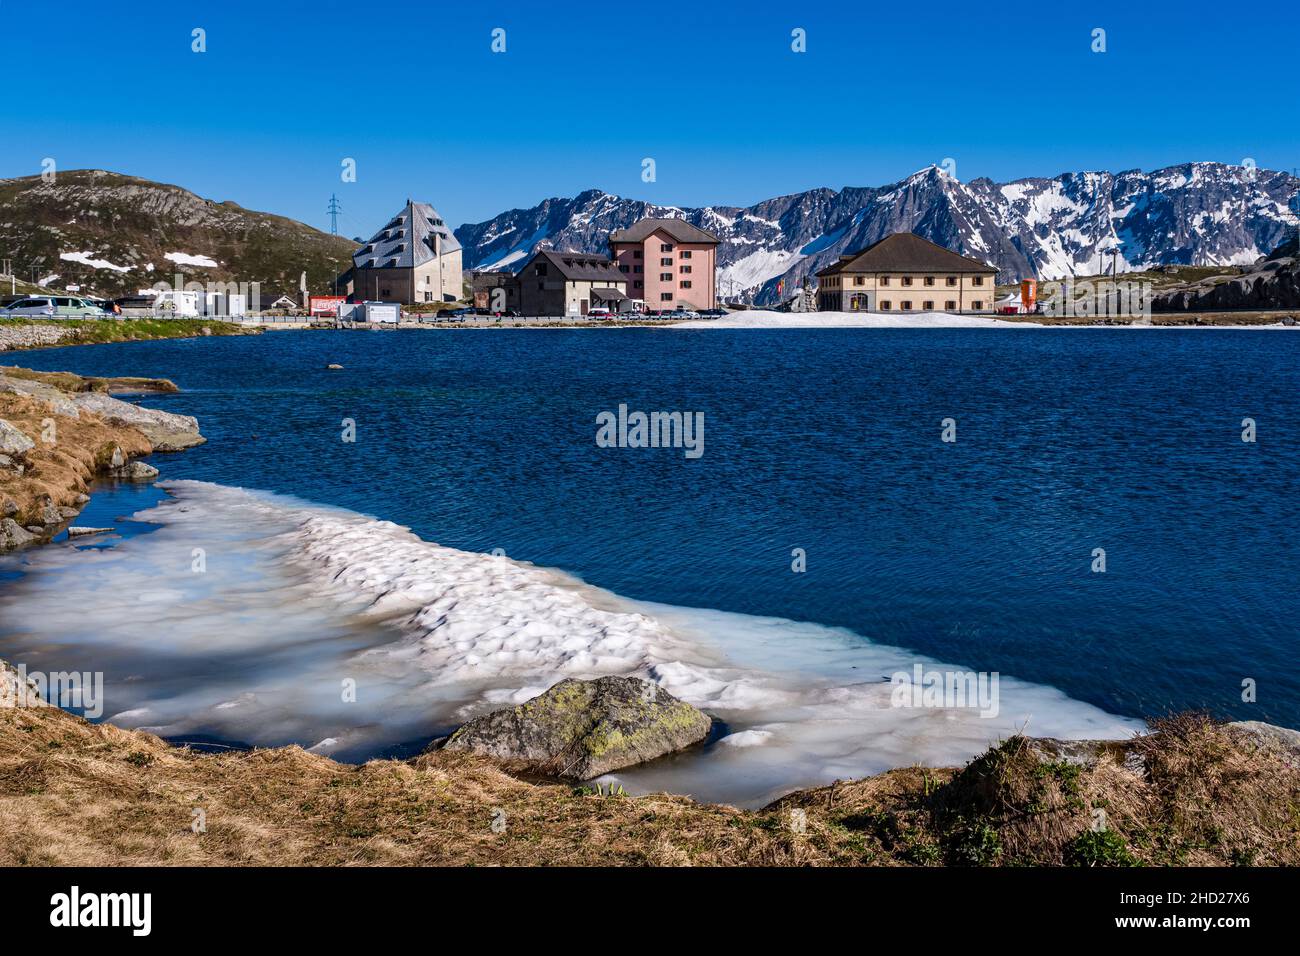 Lakes and buildings, still covered in snow in June, on top of Gotthard Pass at 2106 m, connecting the cantons of Ticino and Uri. Stock Photo